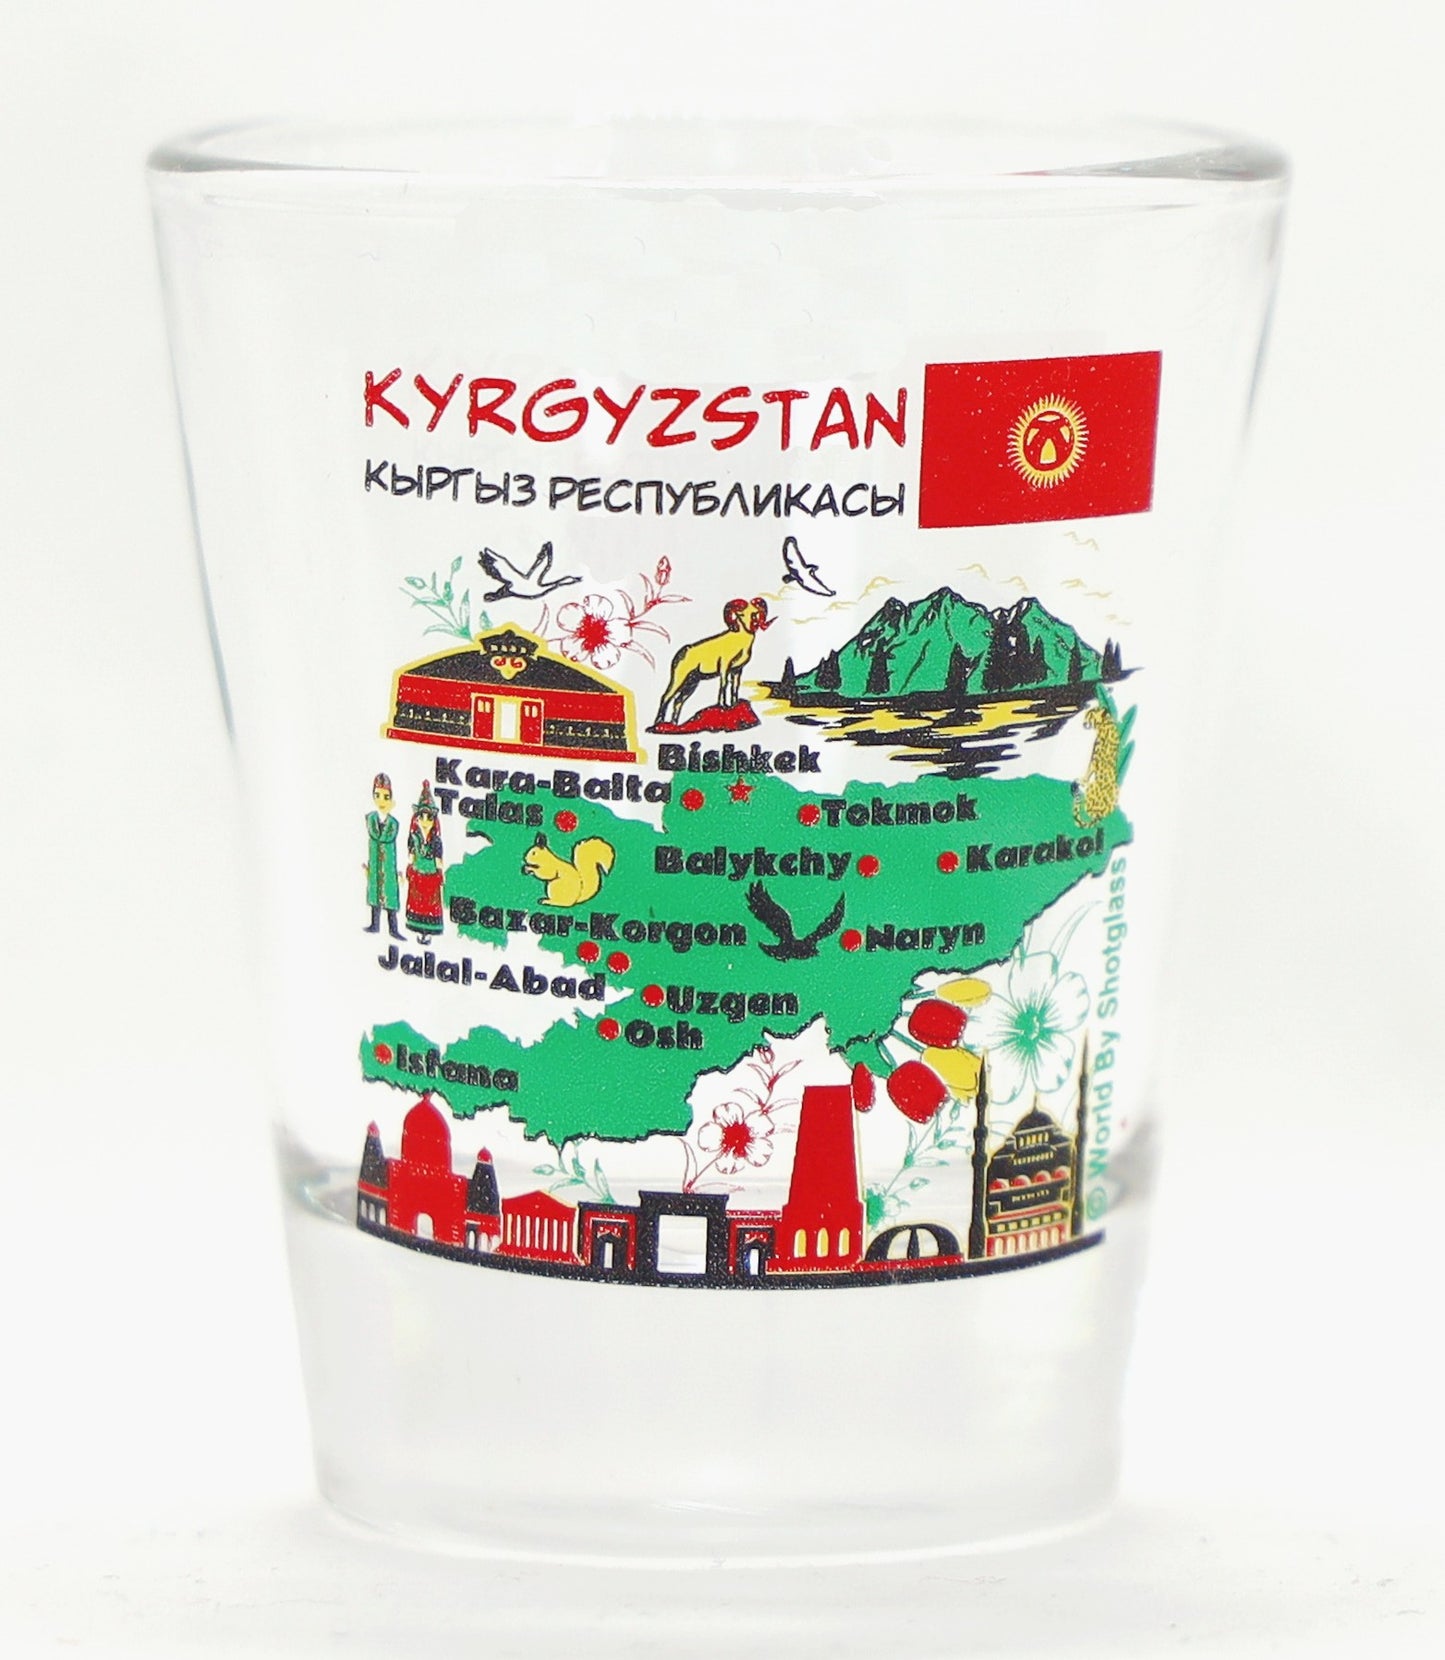 Kyrgyzstan Landmarks and Icons Collage Shot Glass